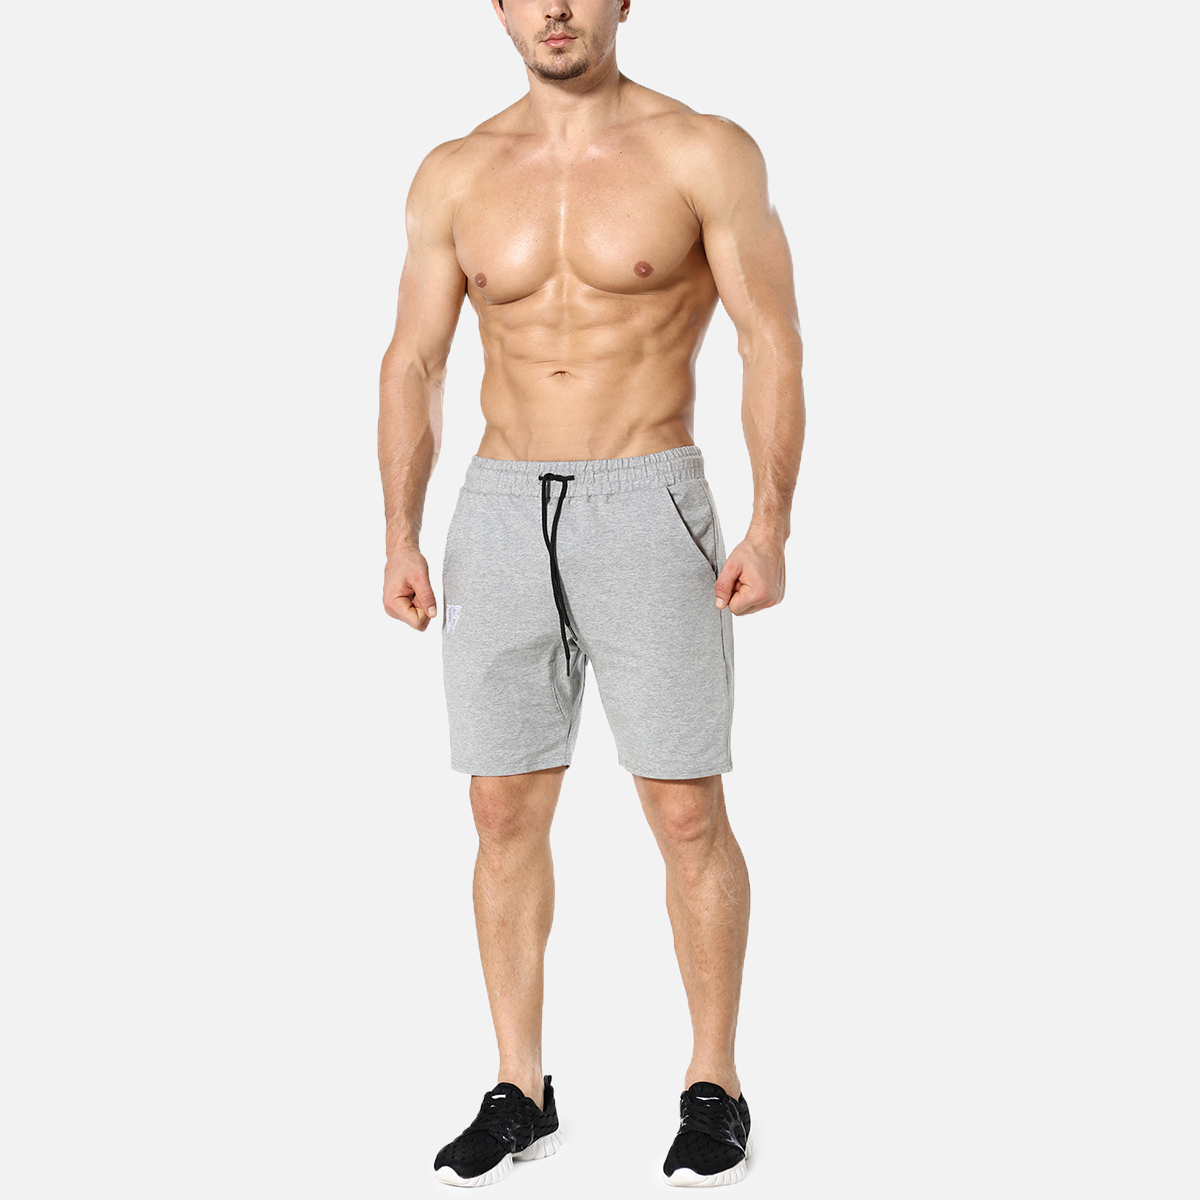 ZENWILL Men's Zip Gym Shorts Running Fitness Sports Workout Shorts Men with Pockets